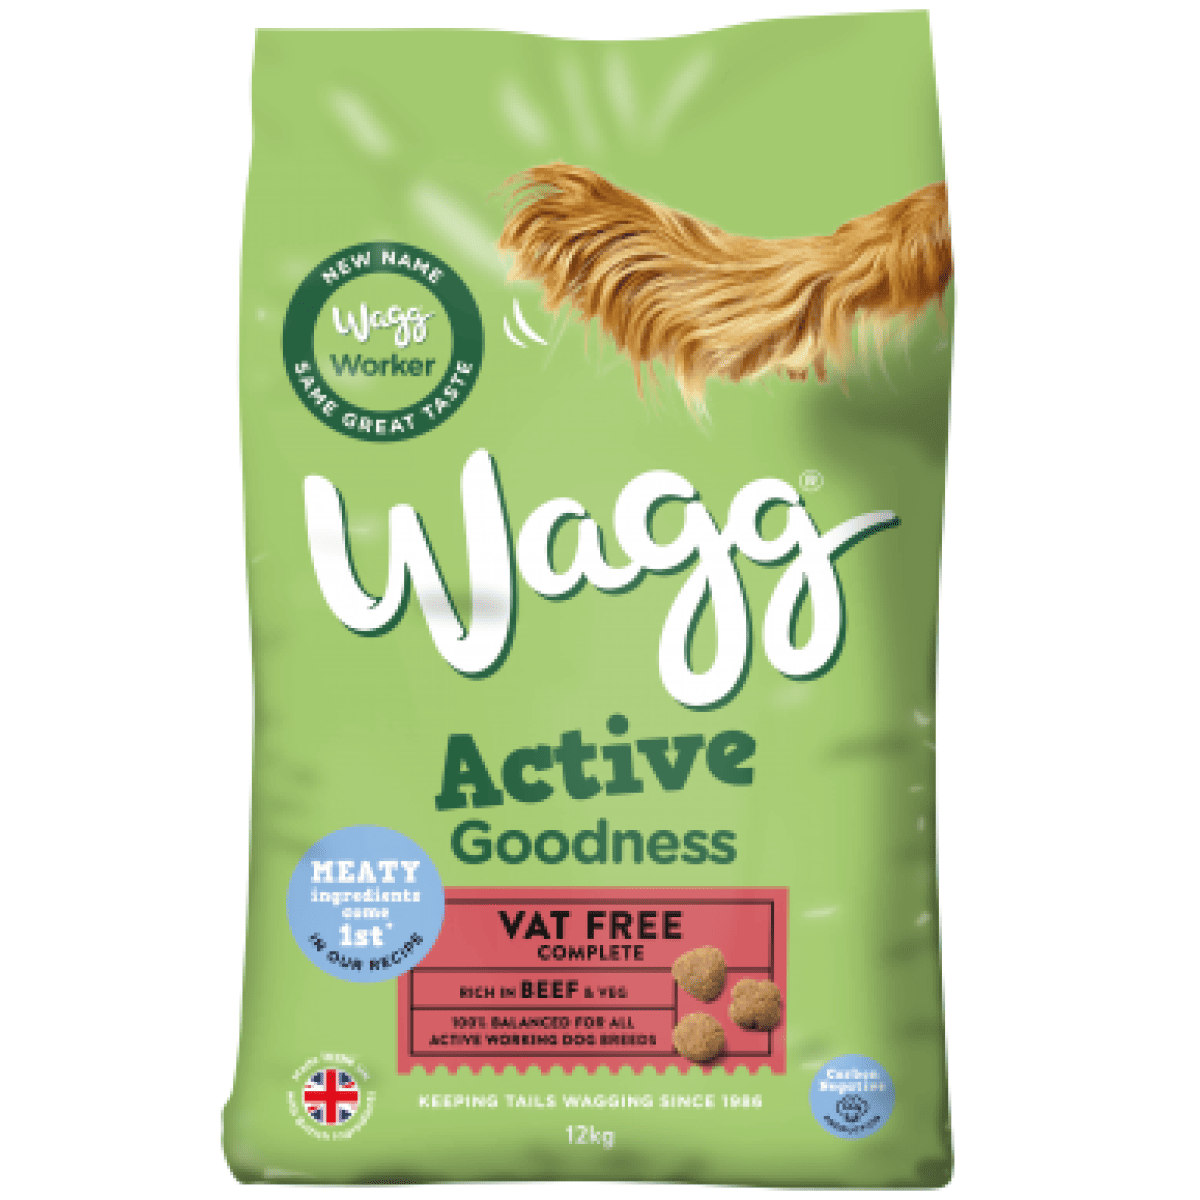 Wagg Active Goodness Beef 12kg – Pawfect Supplies Ltd Product Image